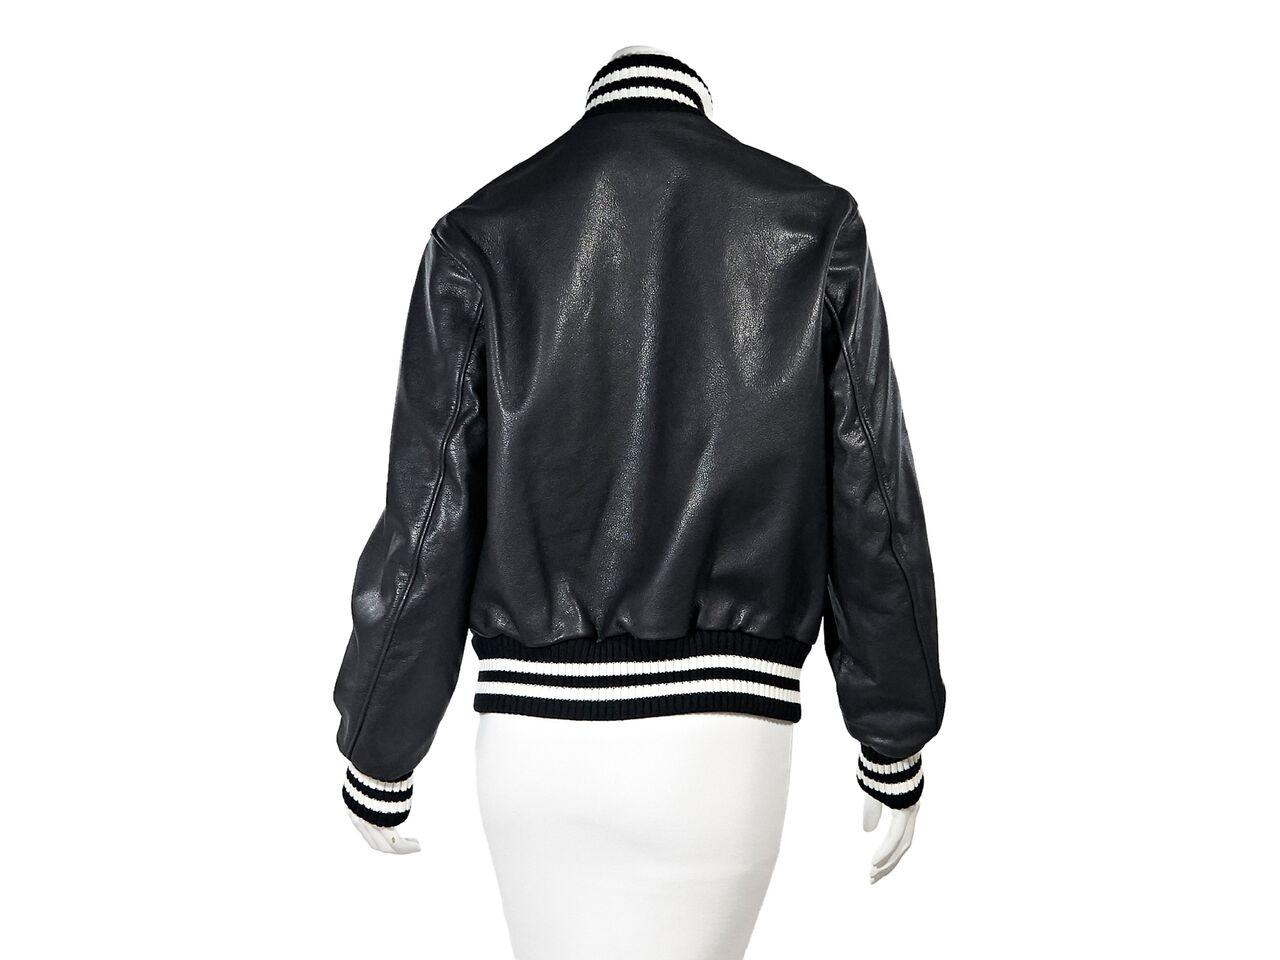 Product details:  Black leather varsity bomber jacket by R13.  Accented with stripes.  Stand collar.  Long sleeves.  Snap-front closure.  Slide waist pockets.  37